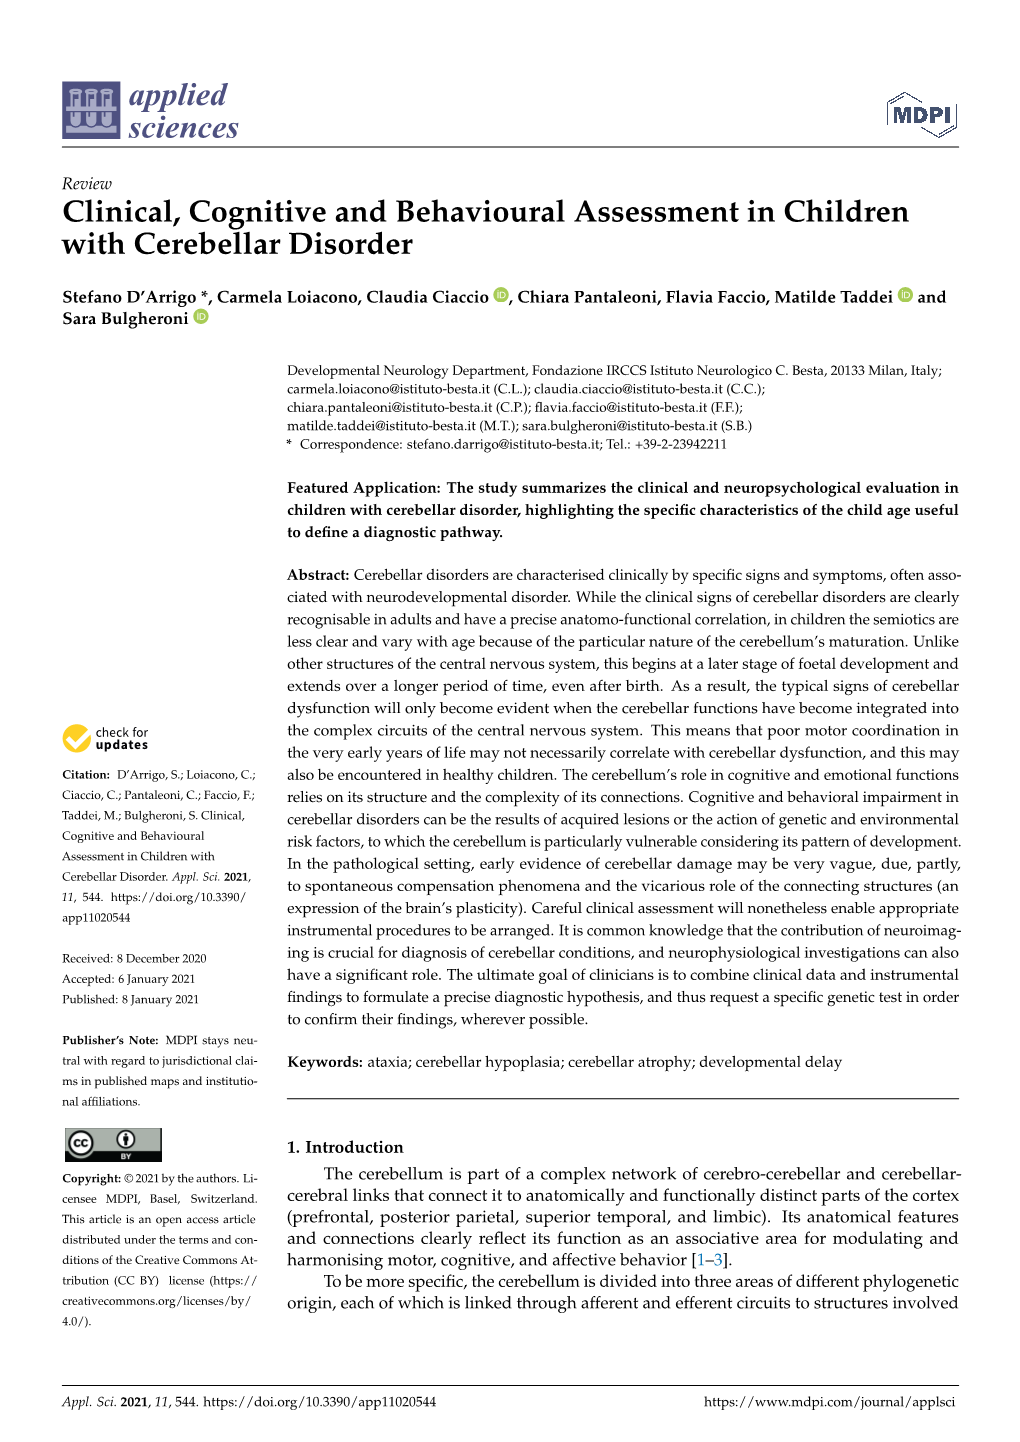 Clinical, Cognitive and Behavioural Assessment in Children with Cerebellar Disorder